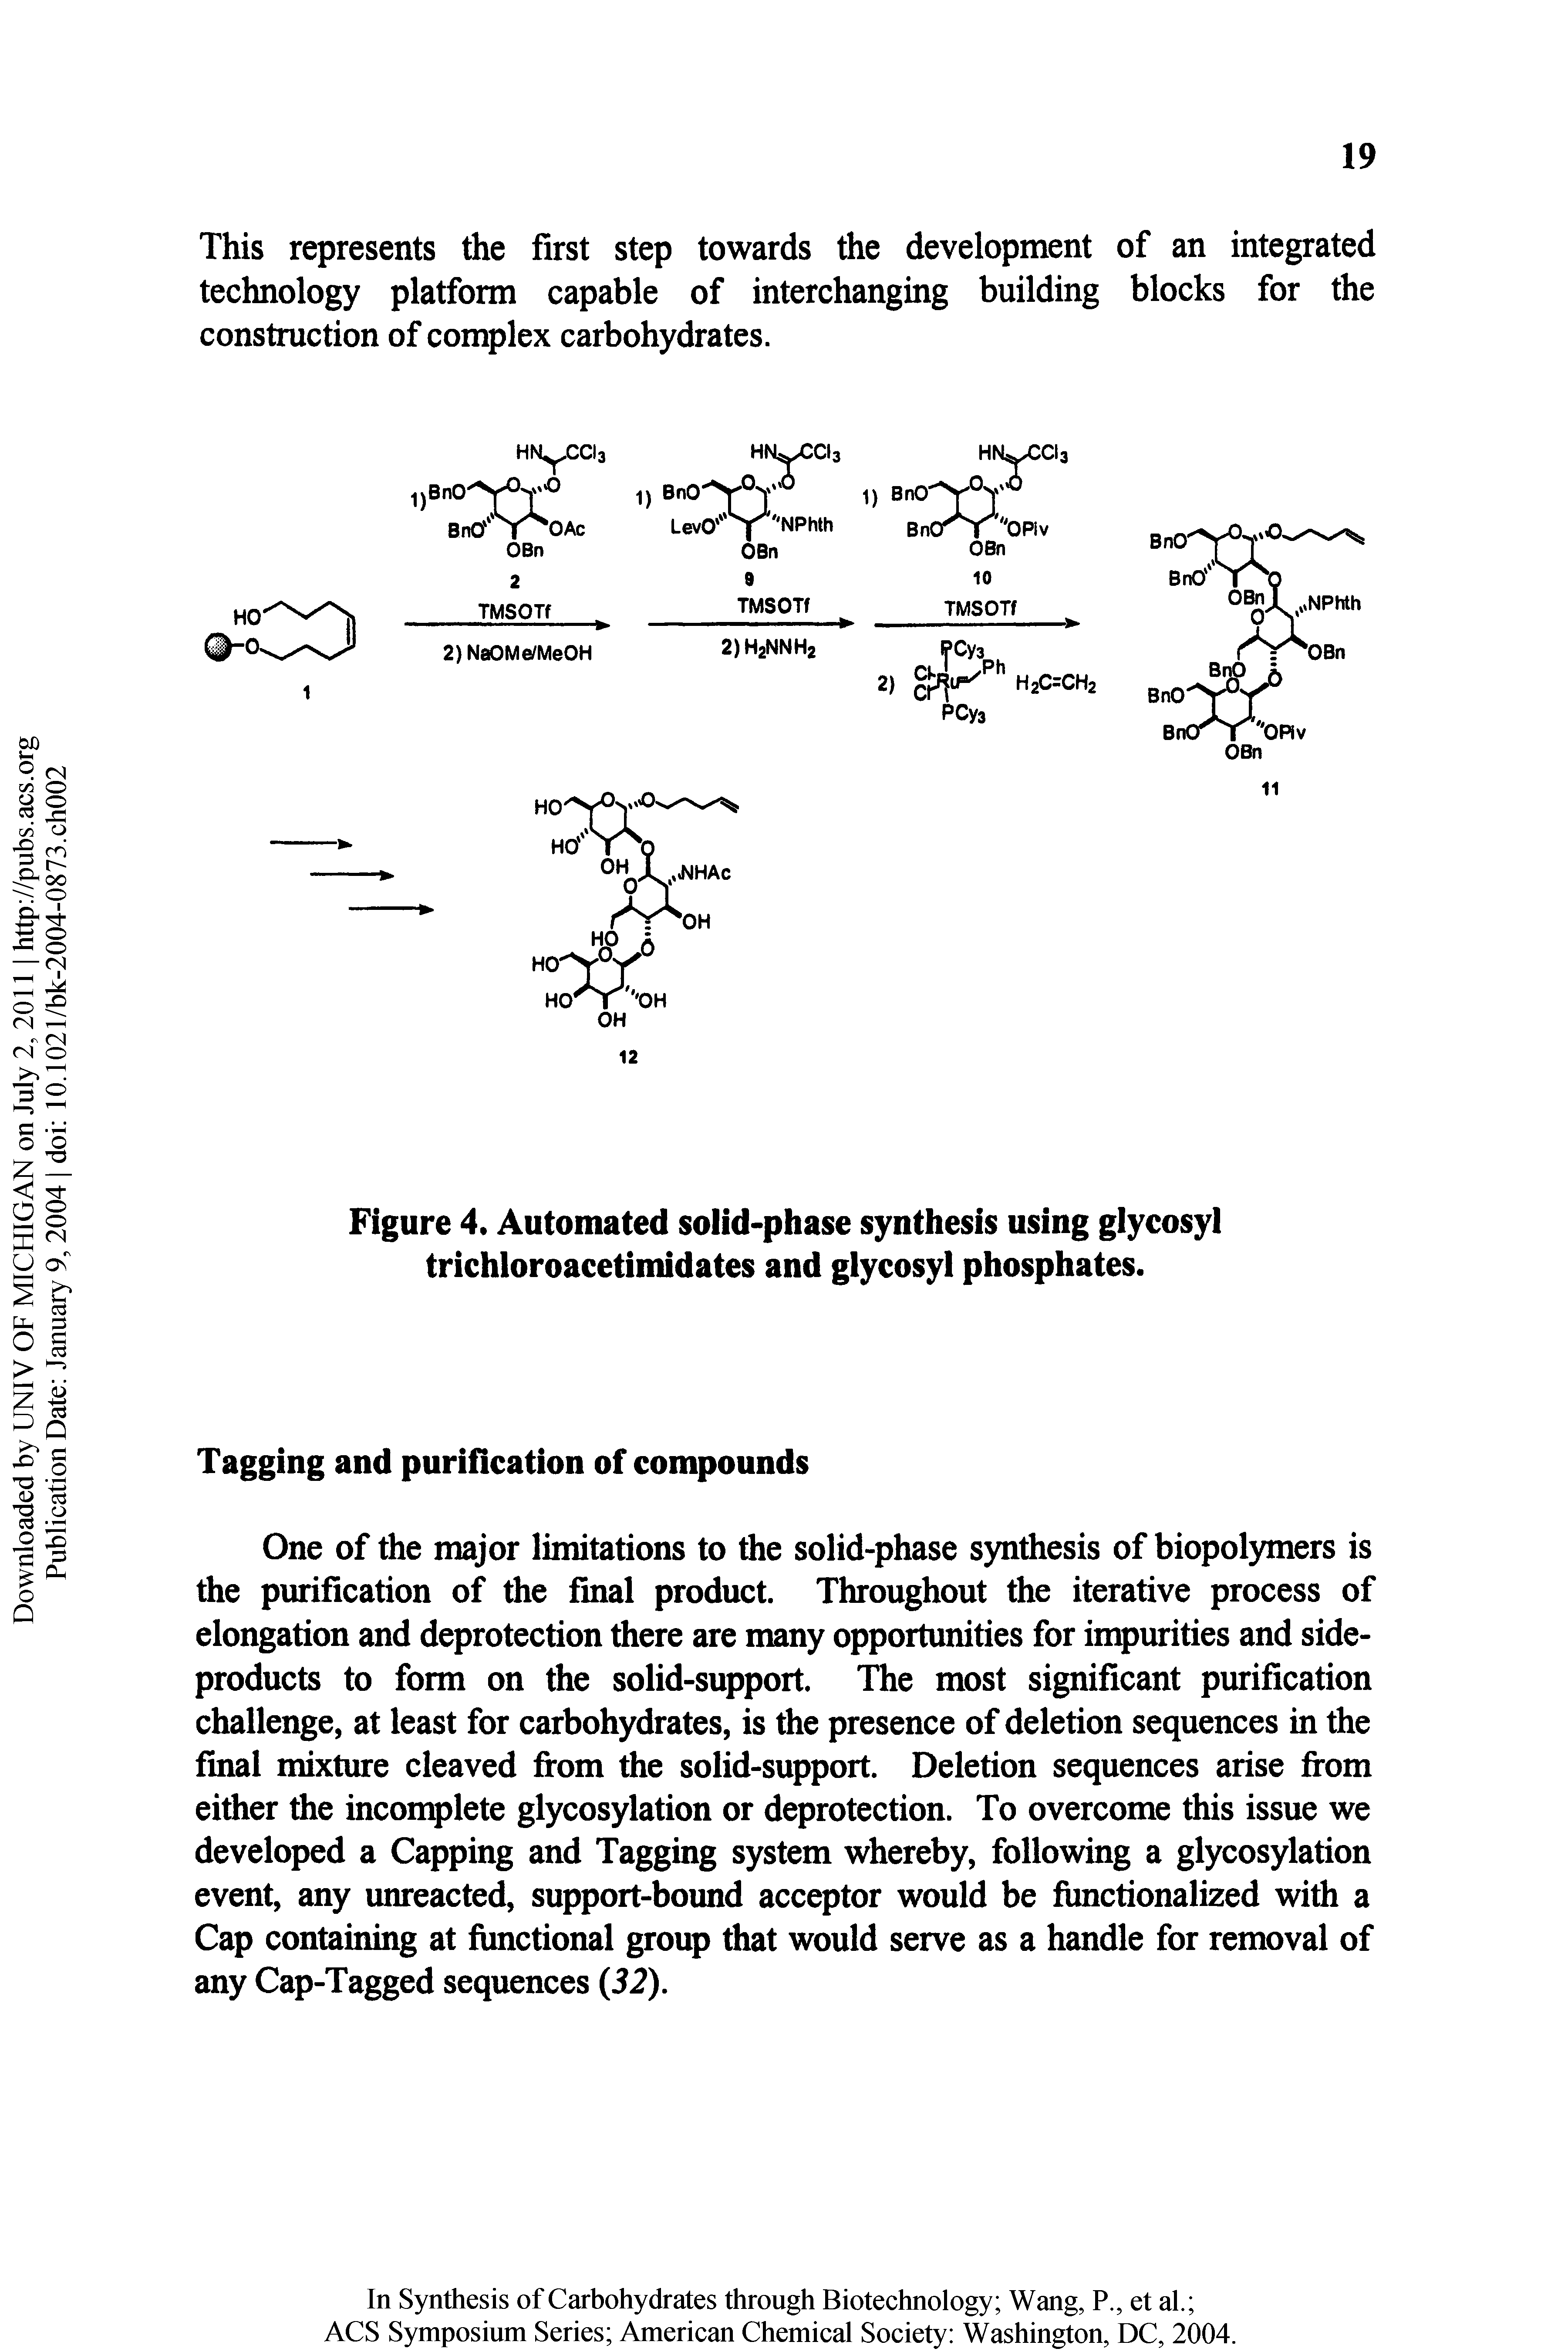 Figure 4. Automated solid-phase synthesis using glycosyl trichioroacetimidates and glycosyl phosphates.